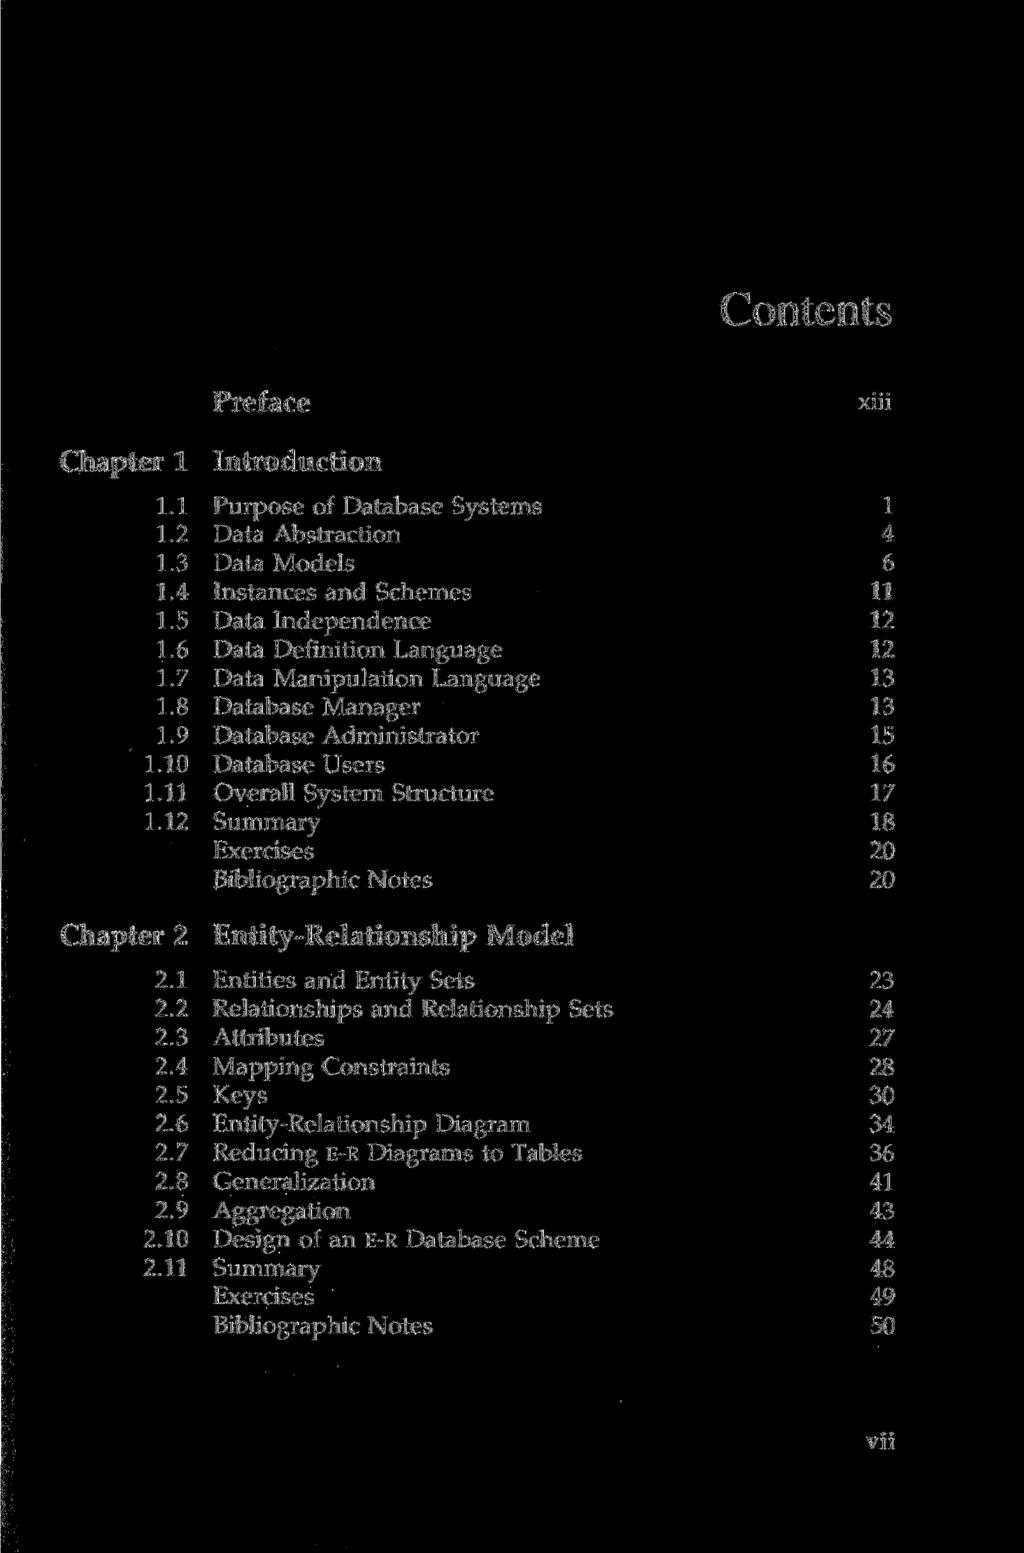 Contents Preface xiü Chapter 1 Introduction 1.1 Purpose of Database Systems 1 1.2 Data Abstraction 4 1.3 Data Models 6 1.4 Instances and Schemes 11 1.5 Data Independence 12 1.